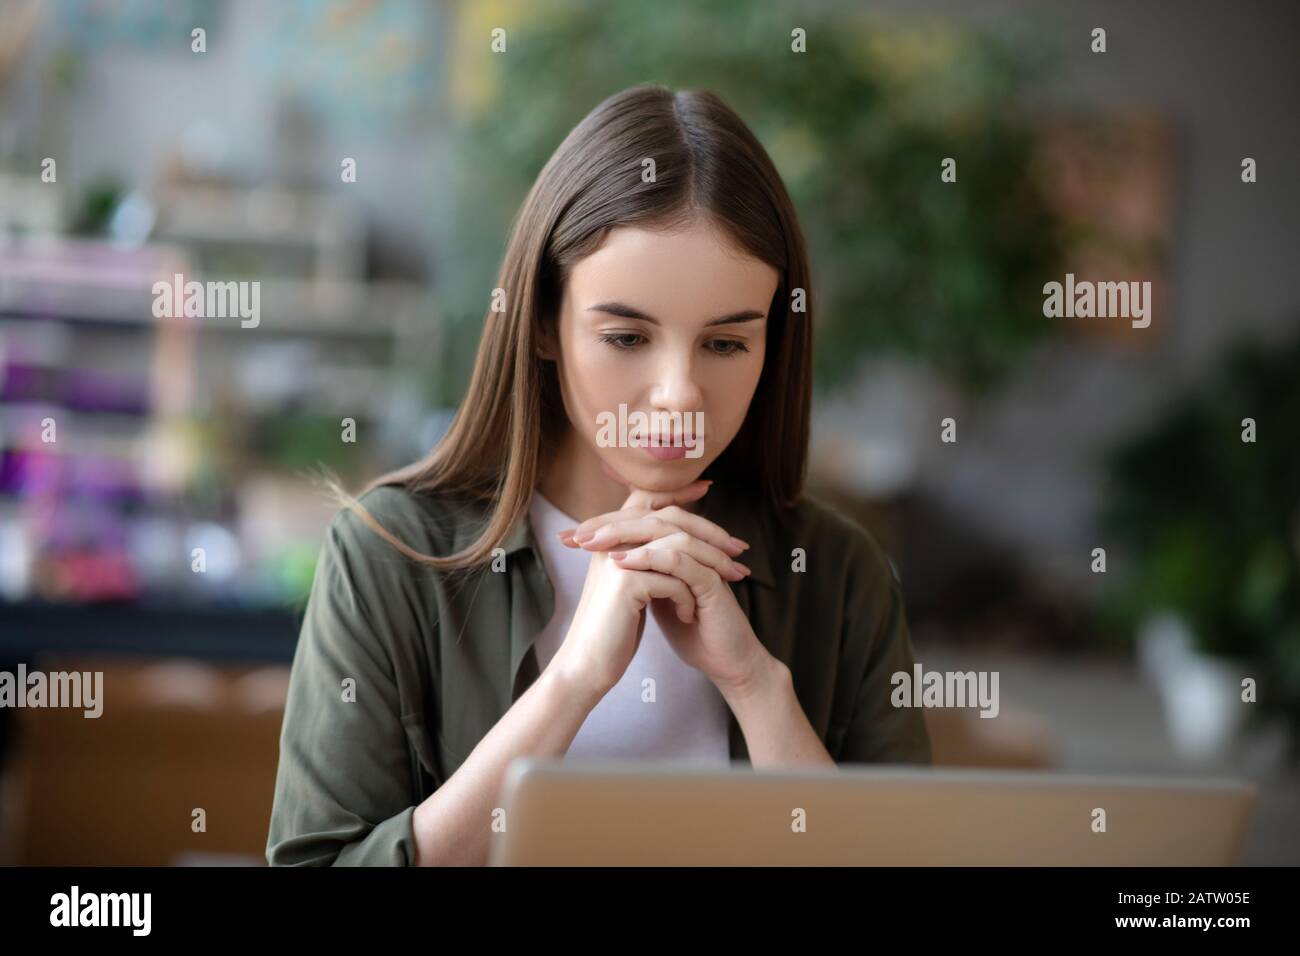 Fatigue. Young pretty girl in office in front of laptop holding hands in front of face looking tiredly at screen. Stock Photo